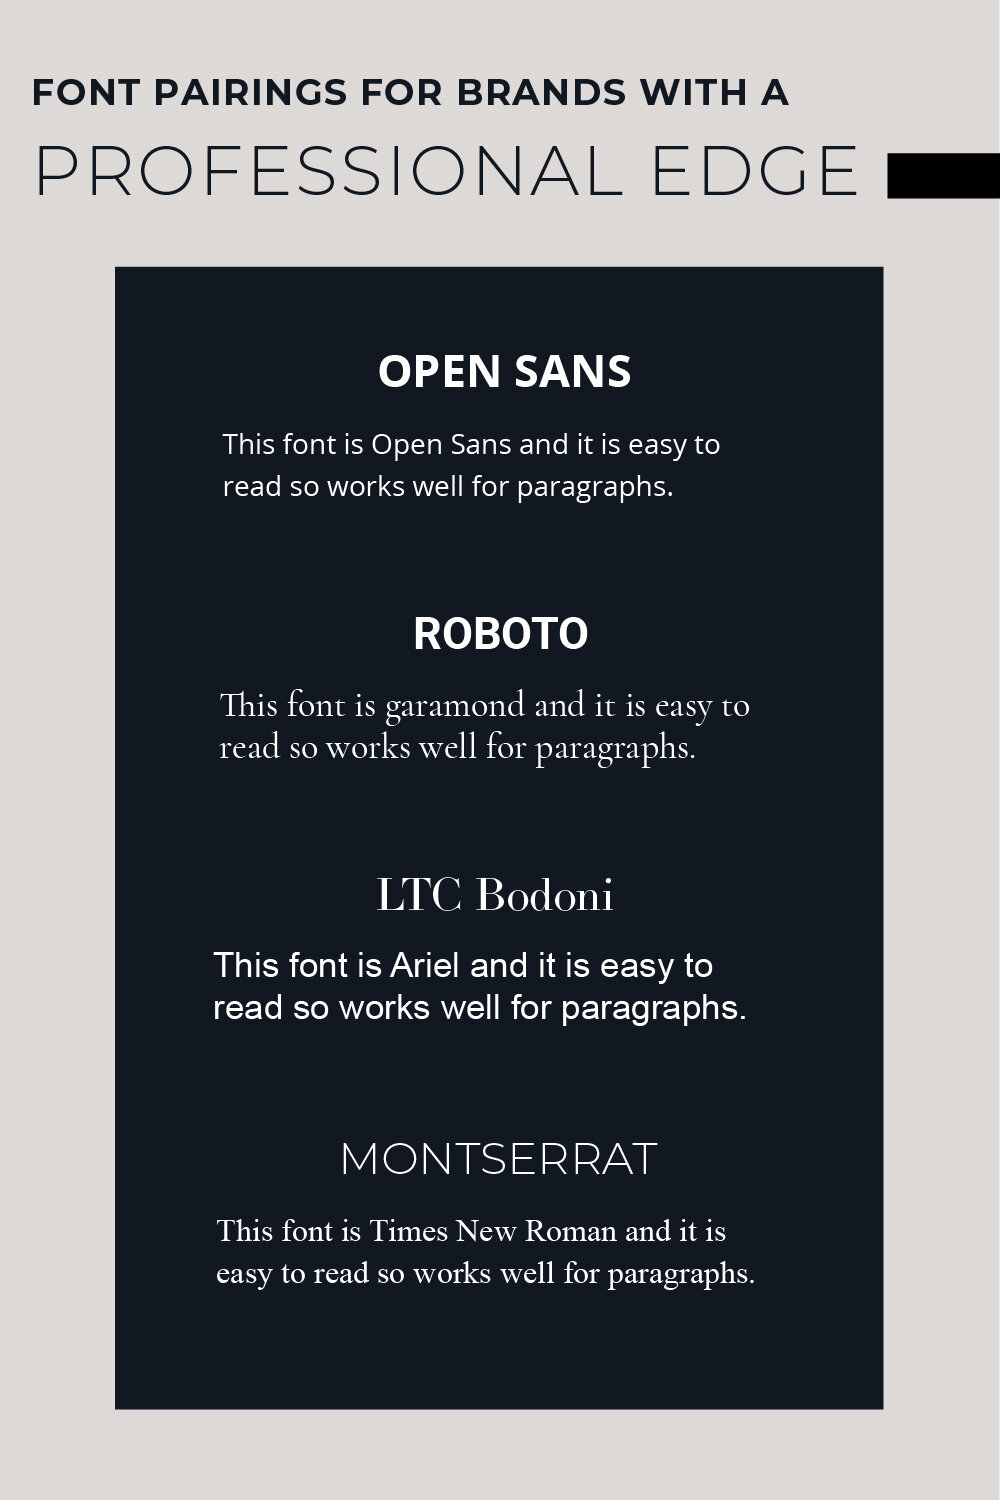 Font pairings for professional businesses